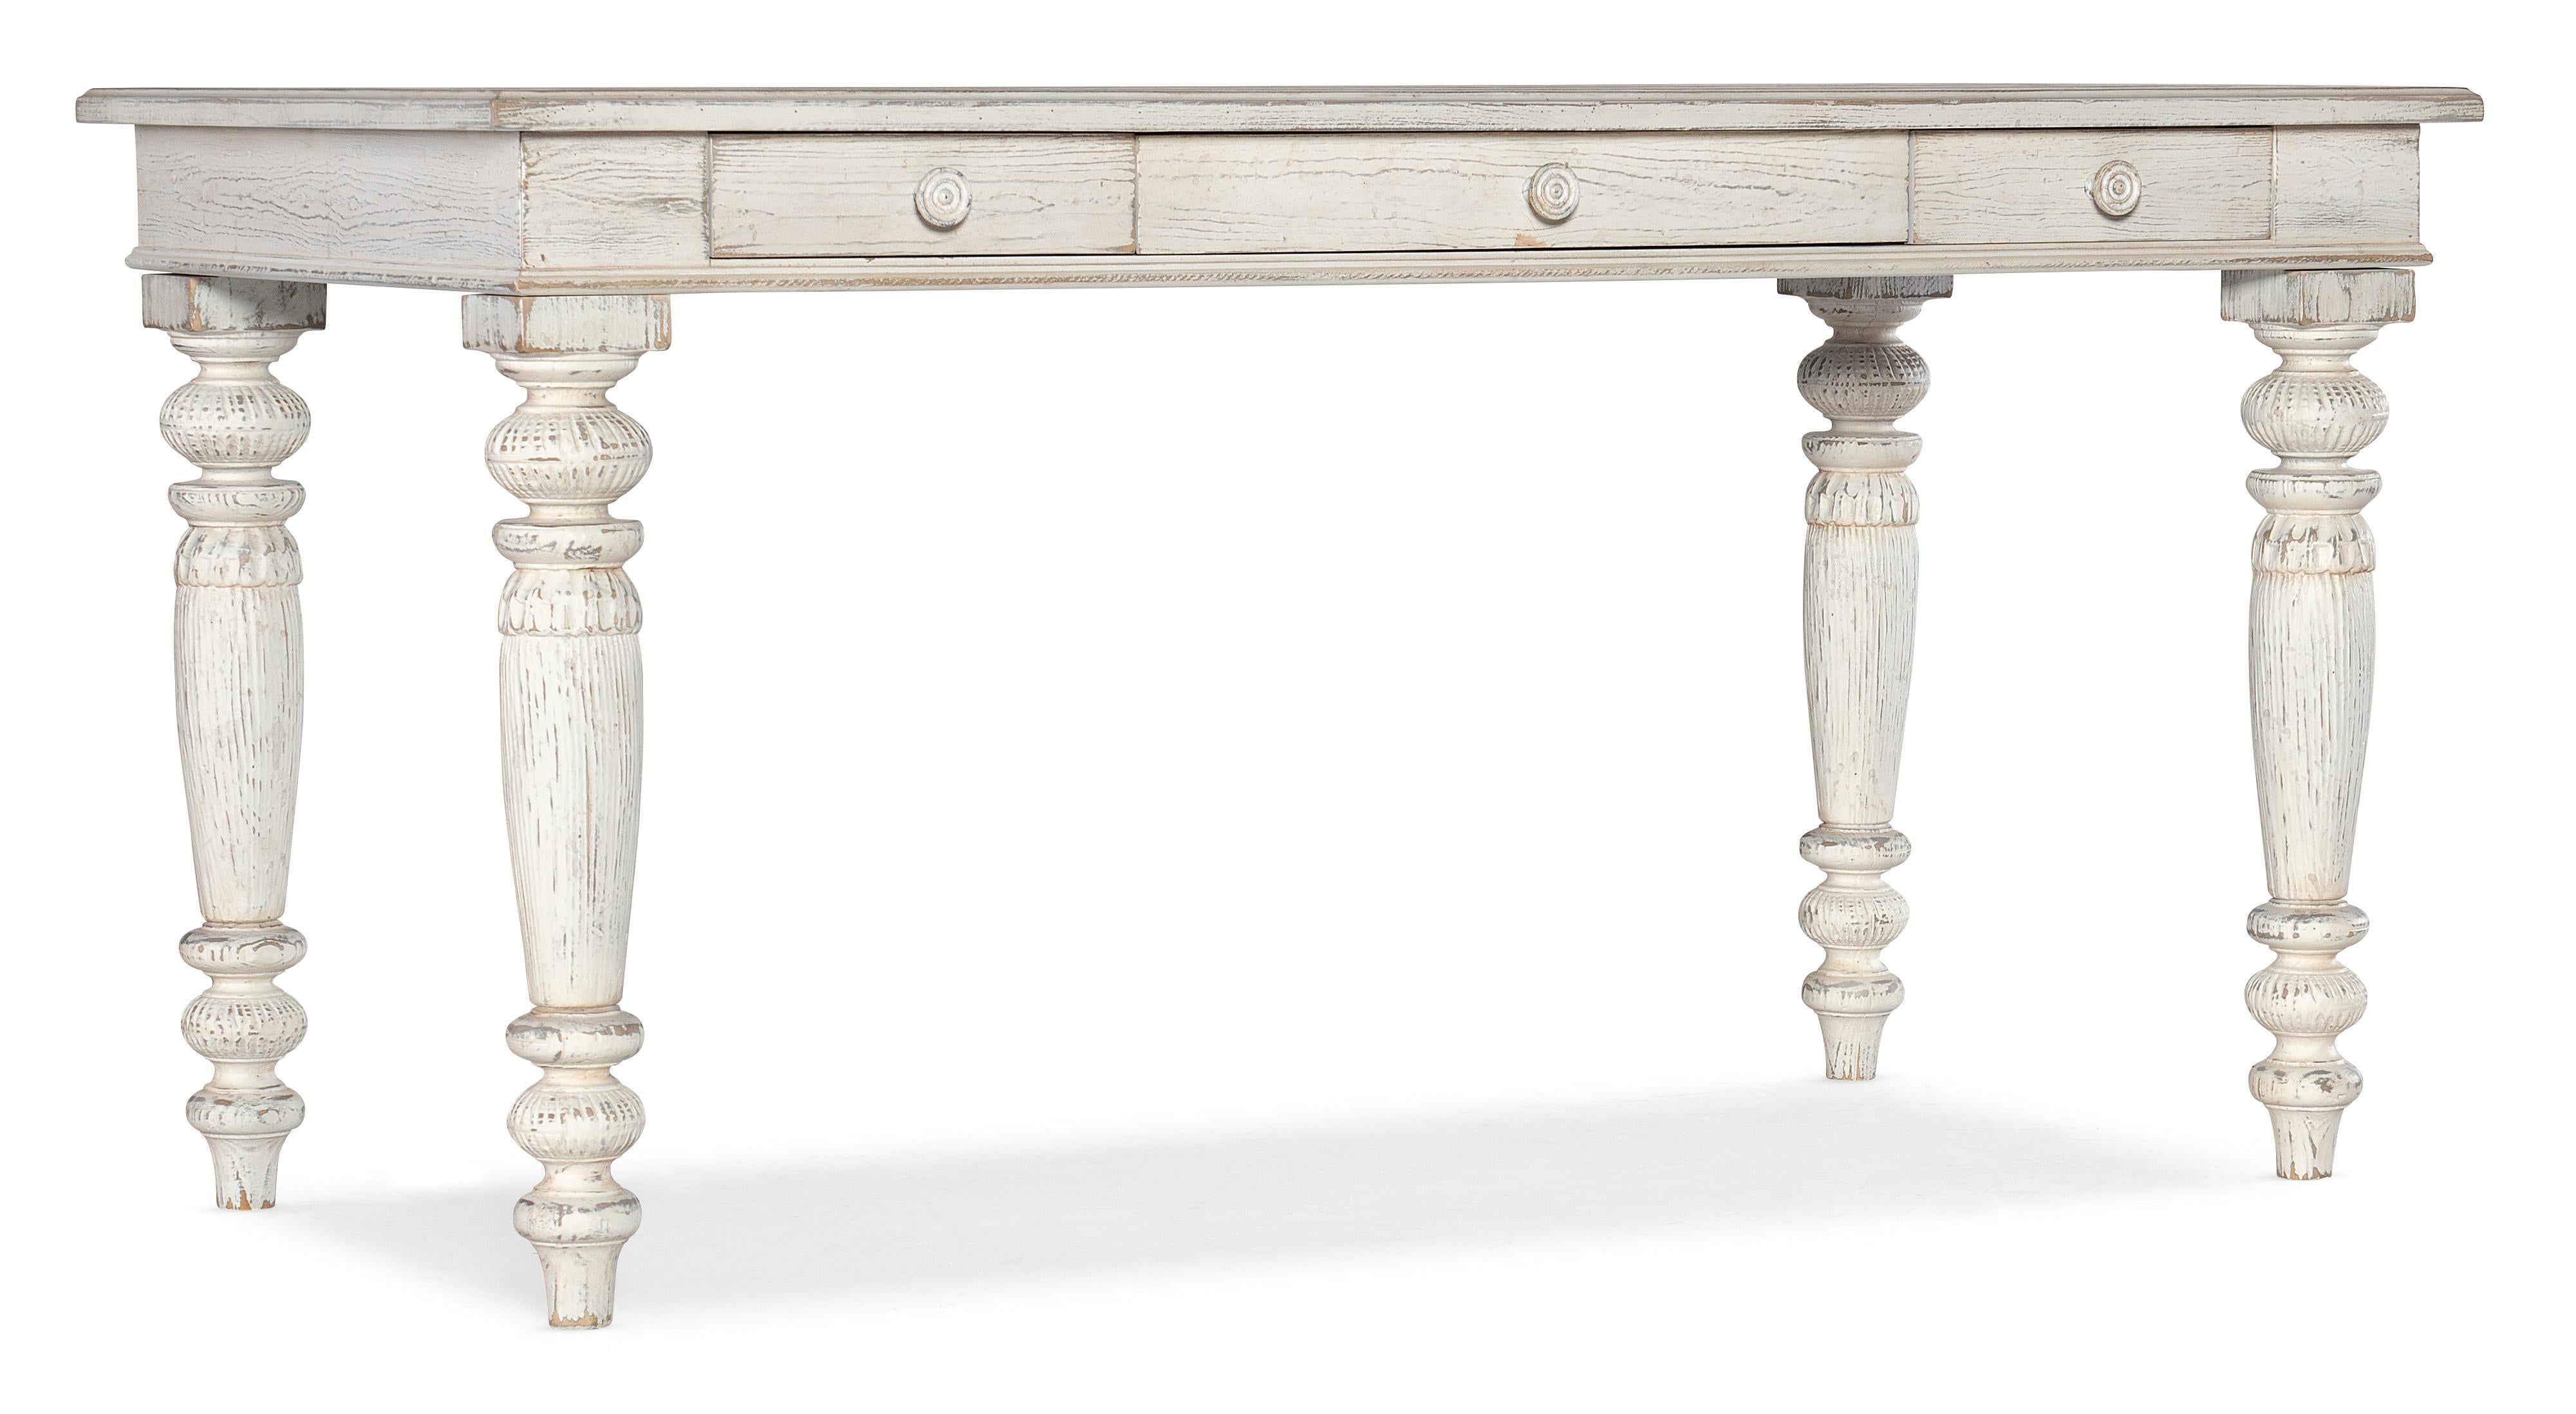 Traditions Writing Desk - 5961-10460-02